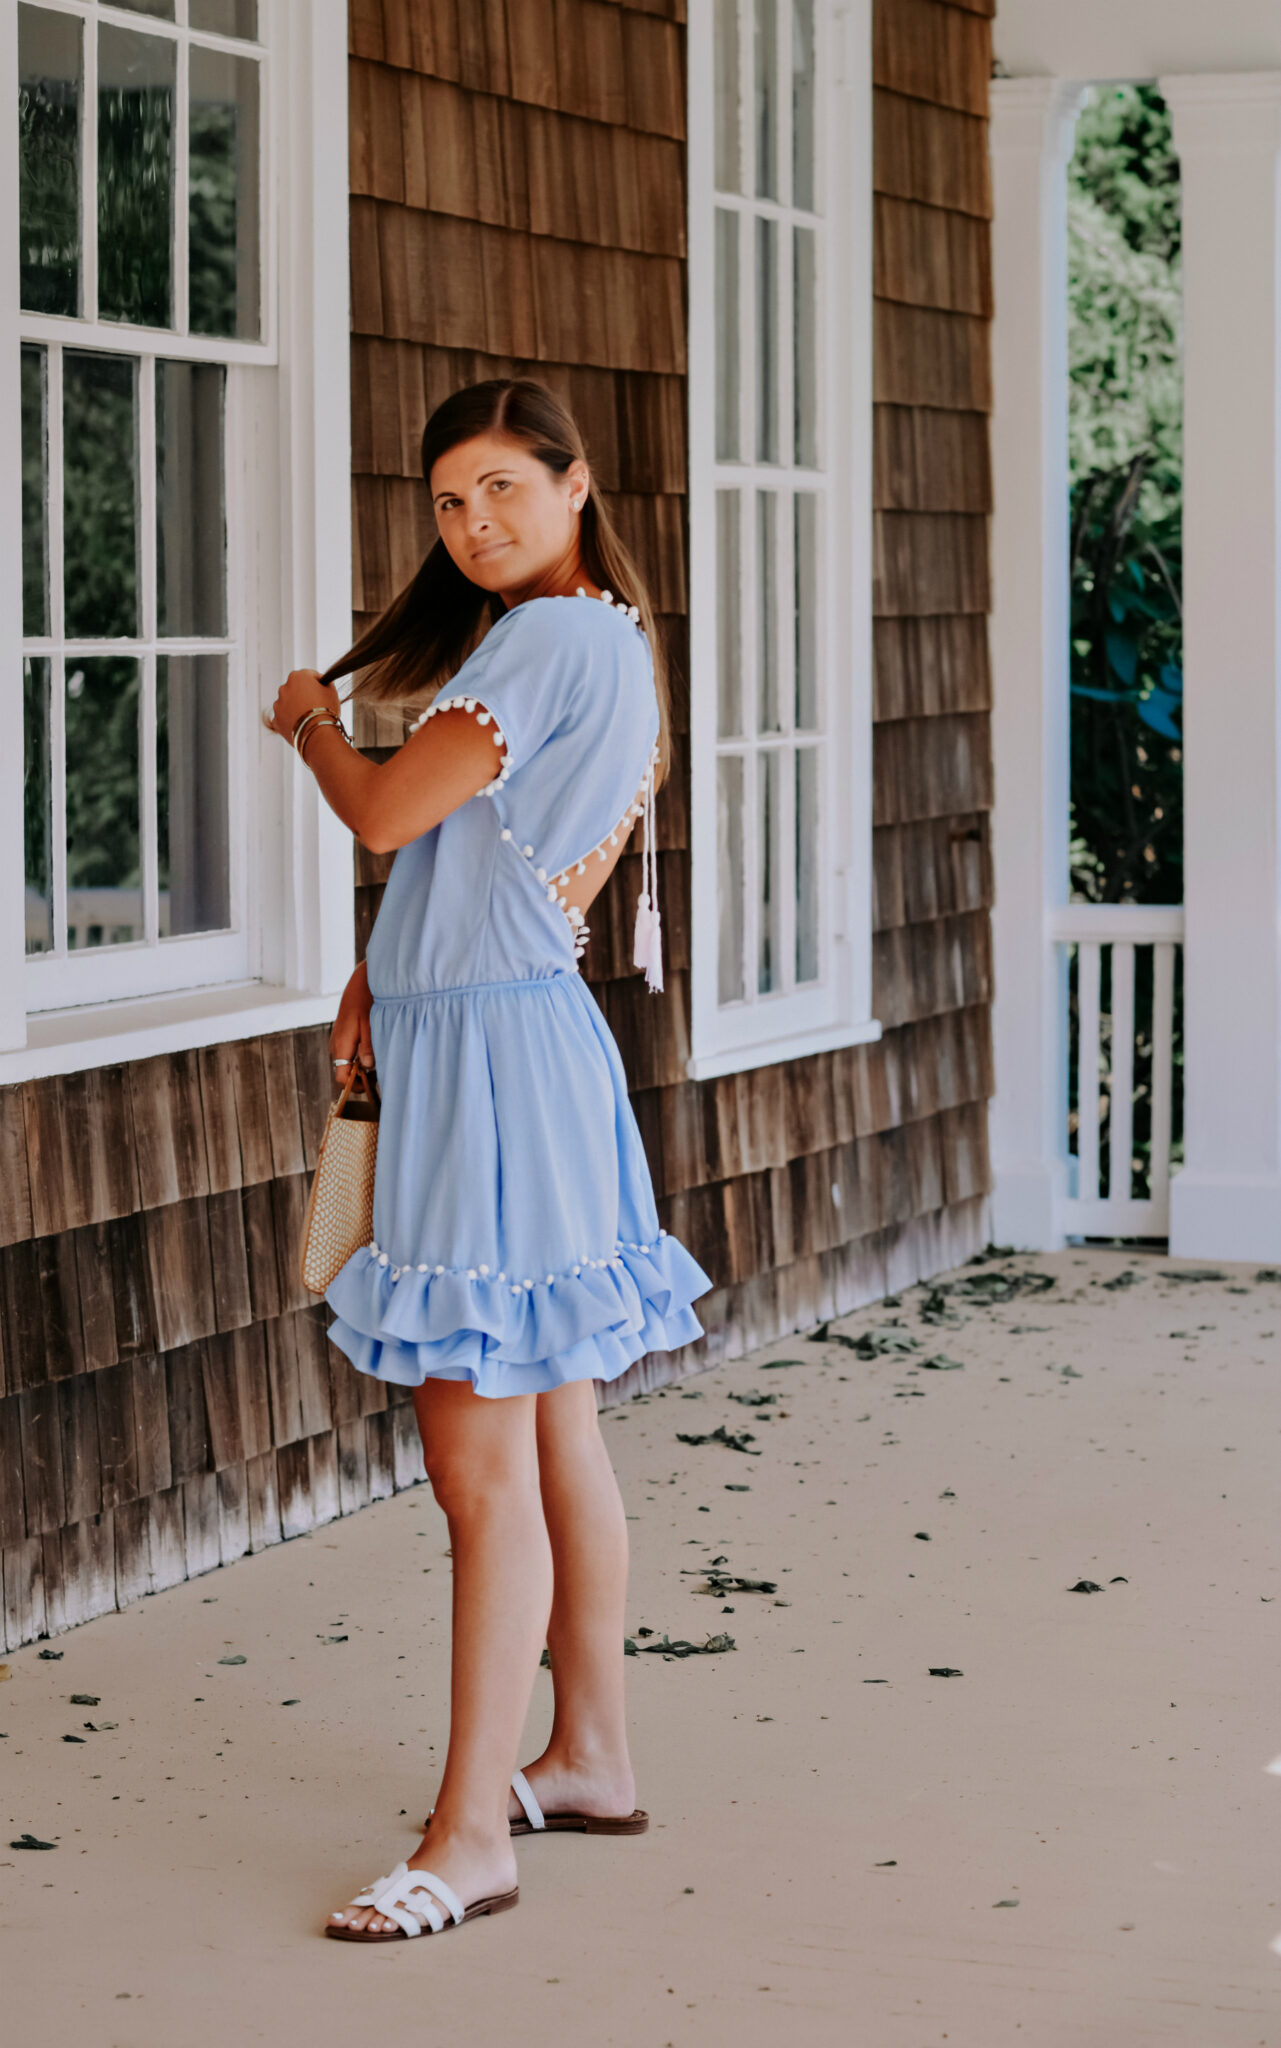 Fun Summer Dresses For Date Night